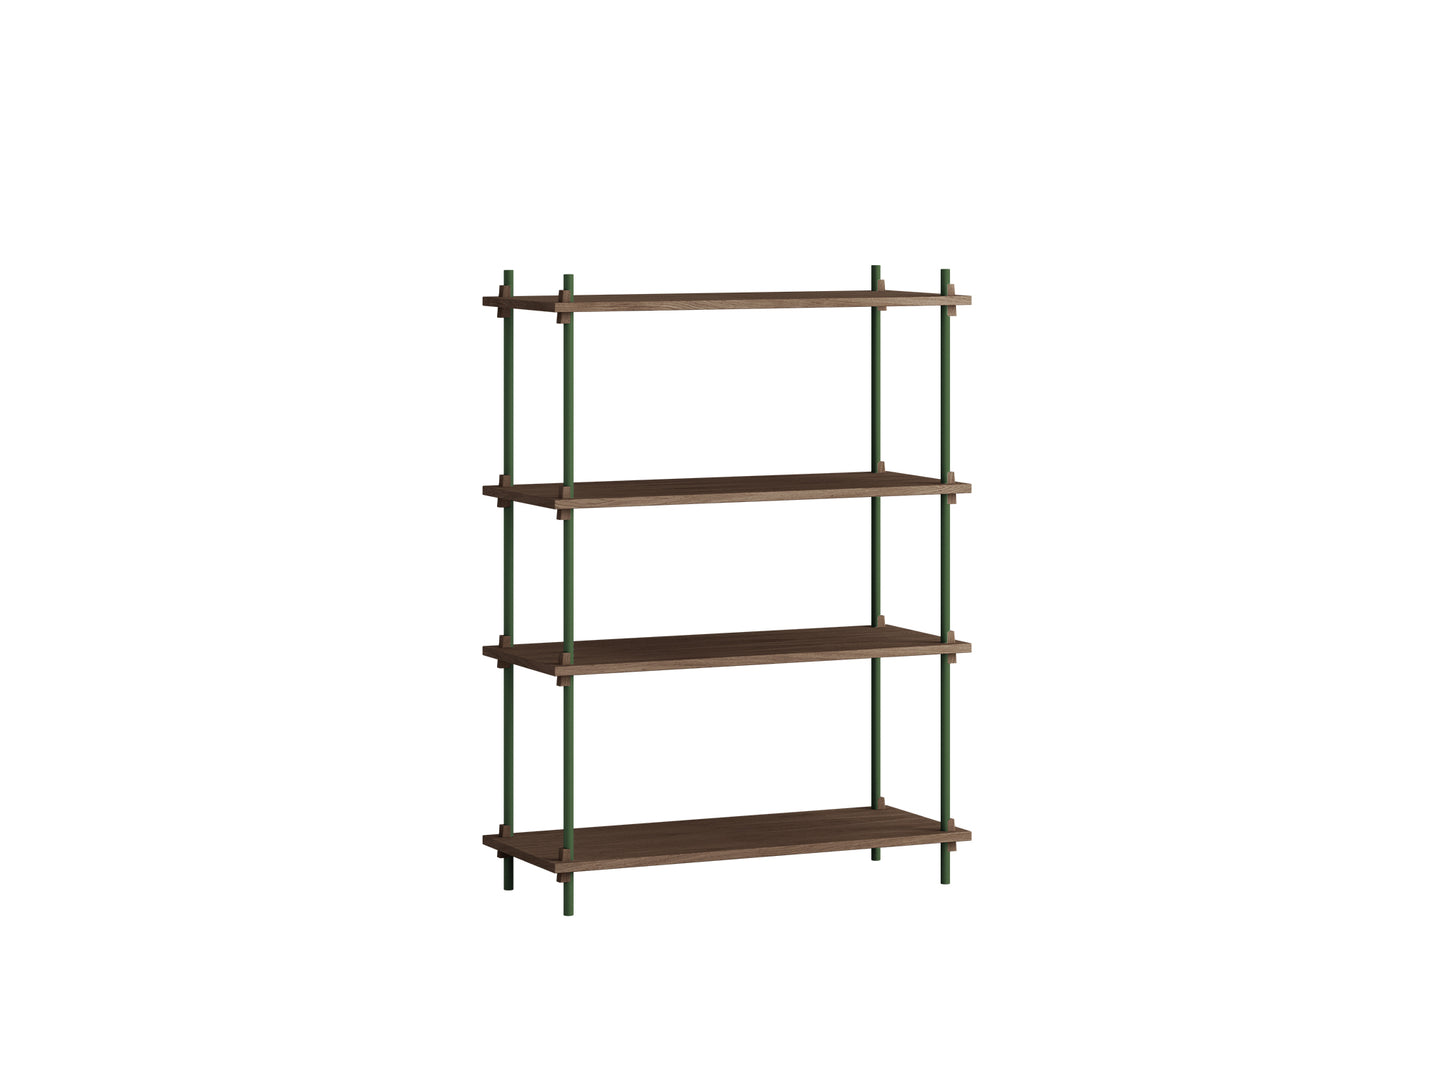 Moebe Shelving System - S.115.1.A Set in Pine Green / Smoked Oak